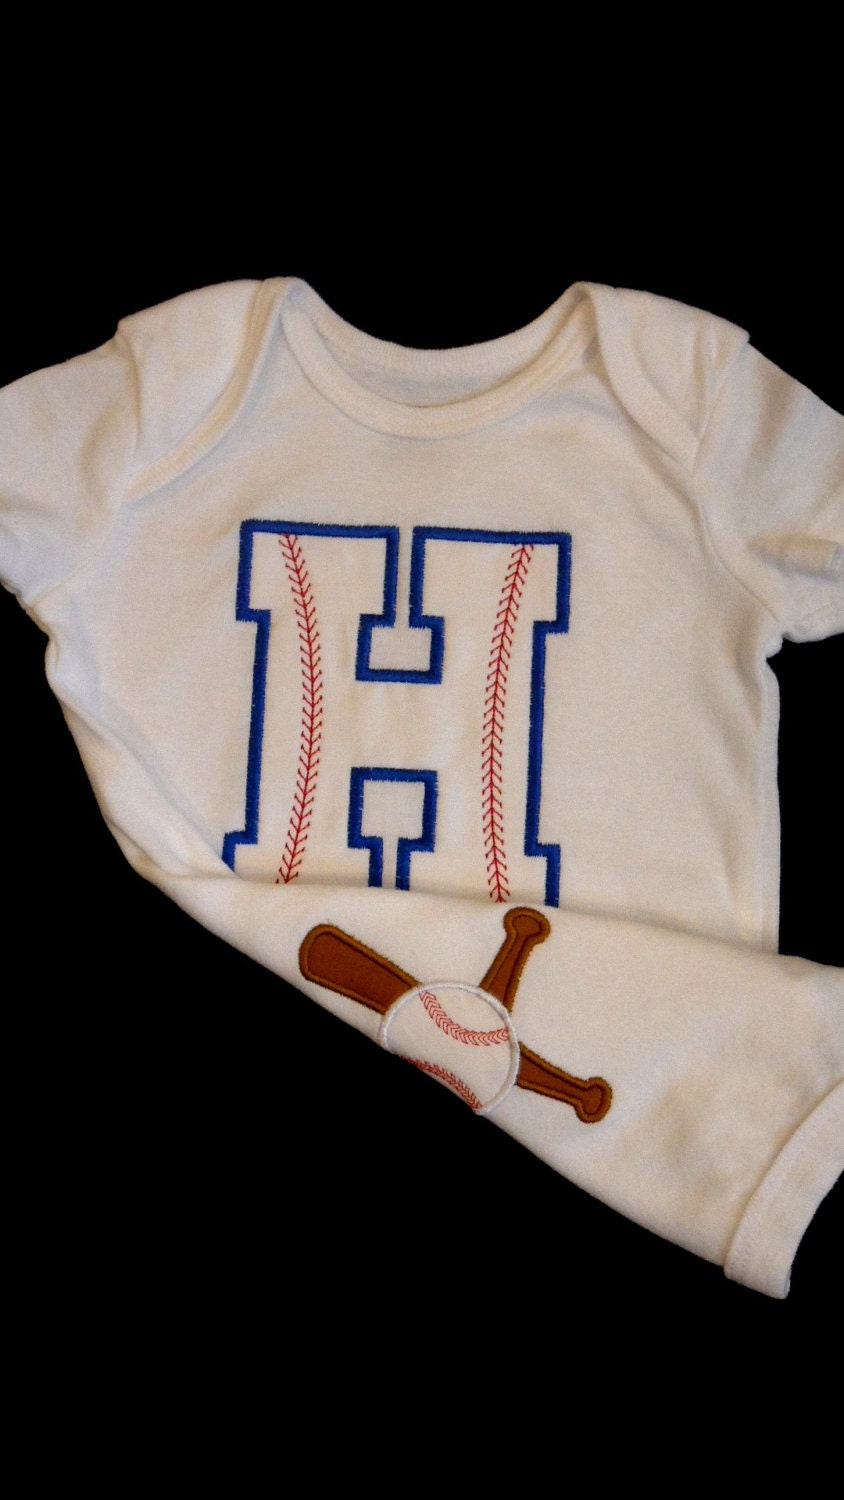 Monogram Baby Boy Clothes Baseball Outfit Monogrammed and